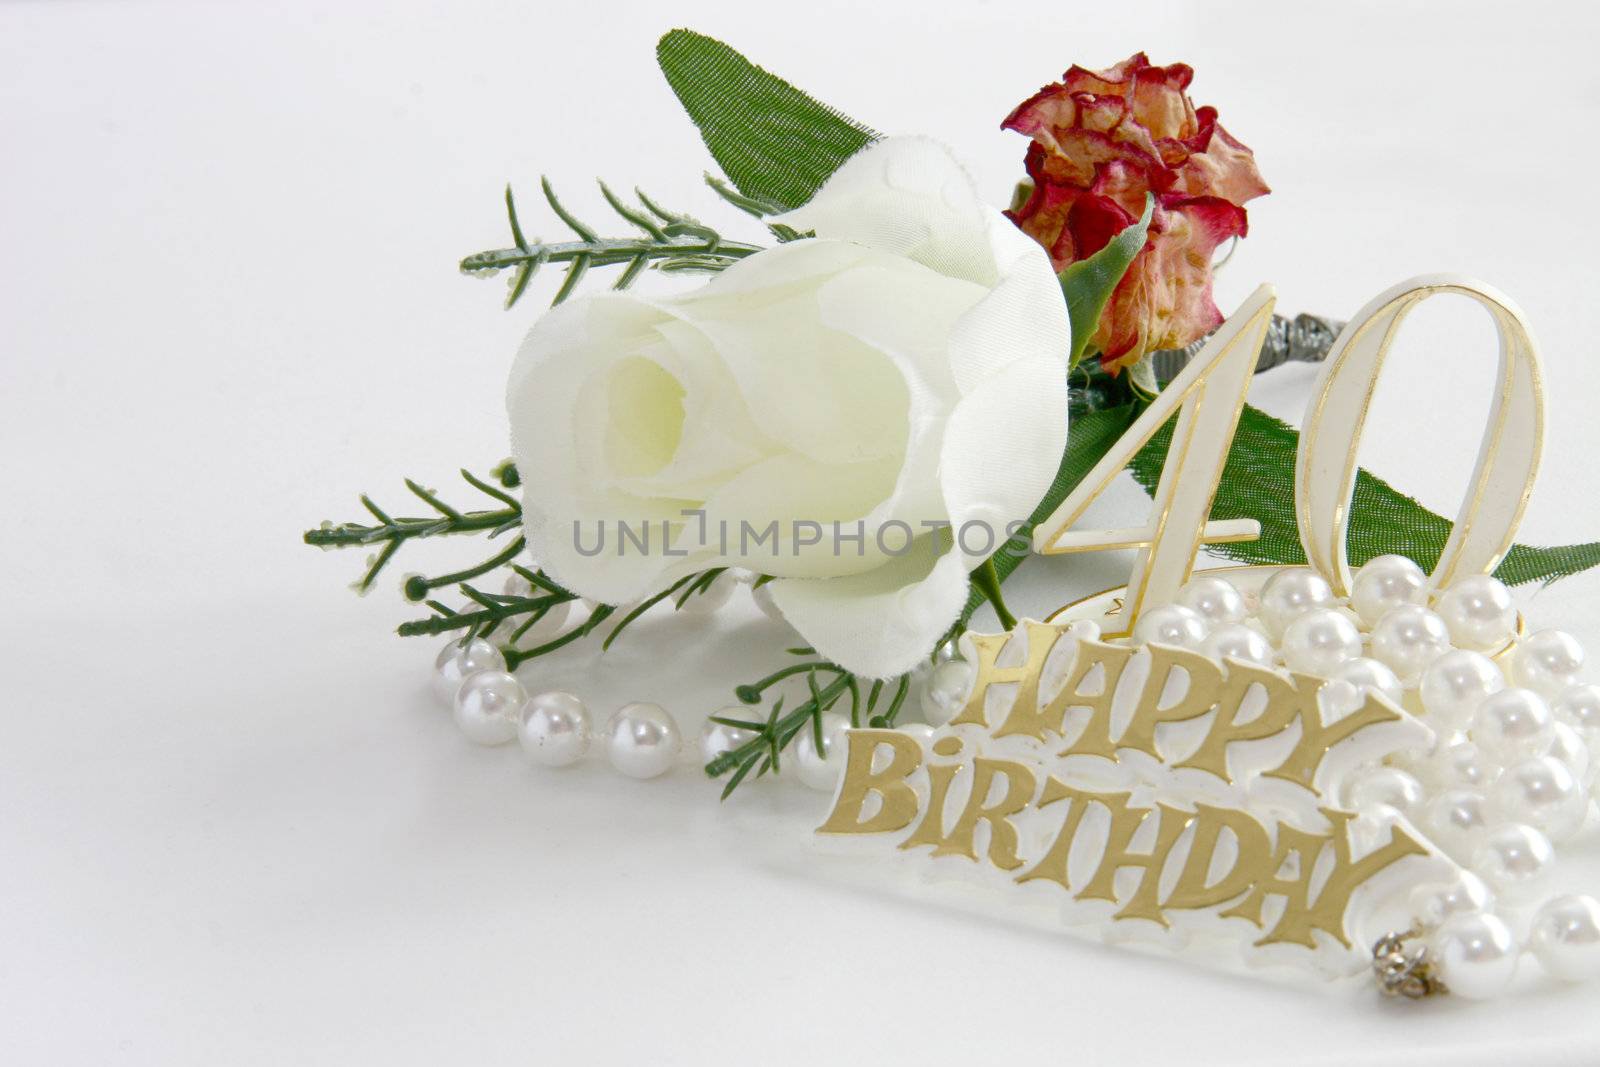 40th  birthday sign with pearls and silk rose, a celebratory concept